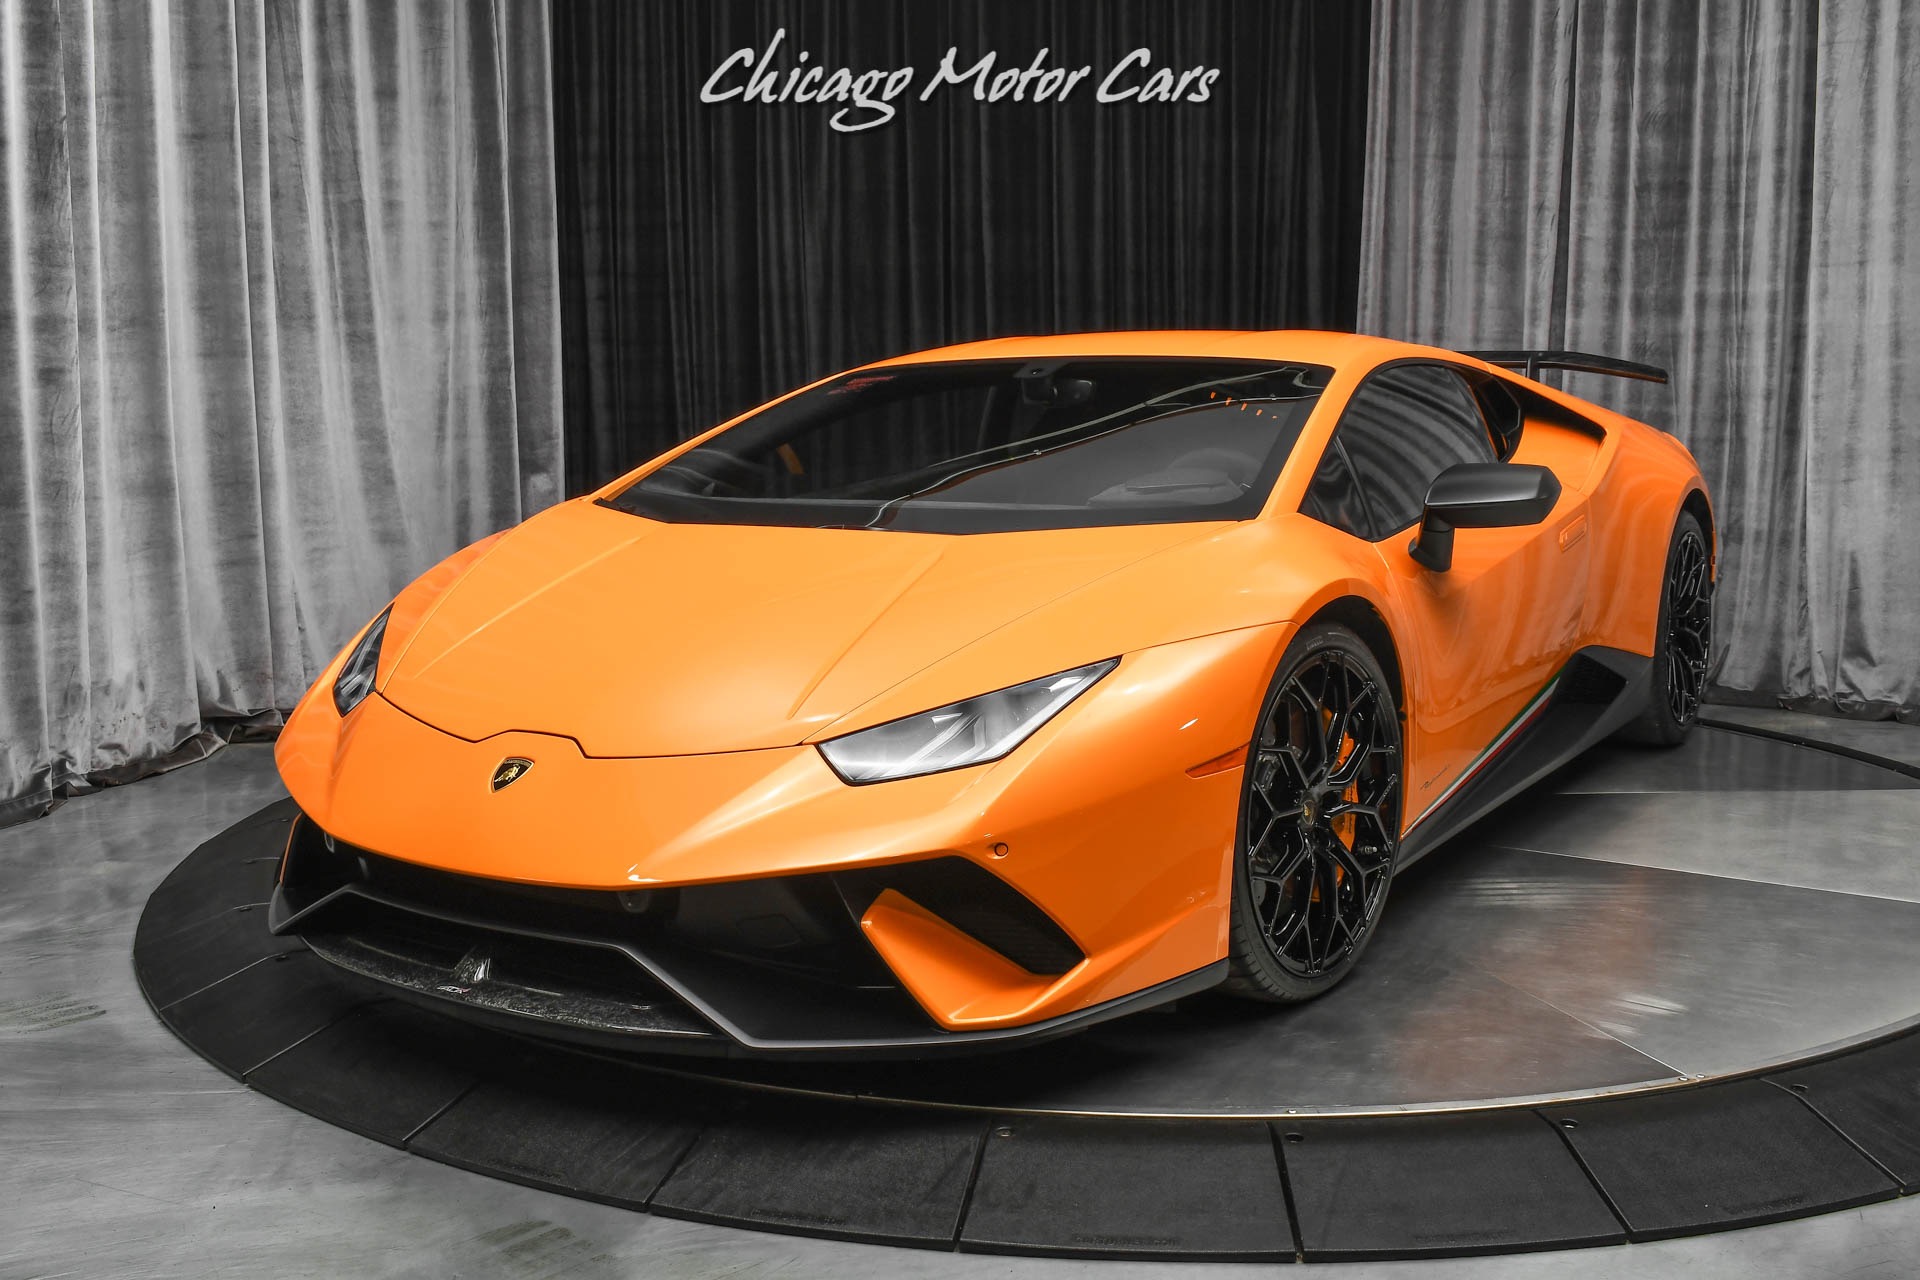 Used-2018-Lamborghini-Huracan-Performante-LP640-4-Coupe-HEFFNER-Twin-Turbo-1500WHP-Built-Everything